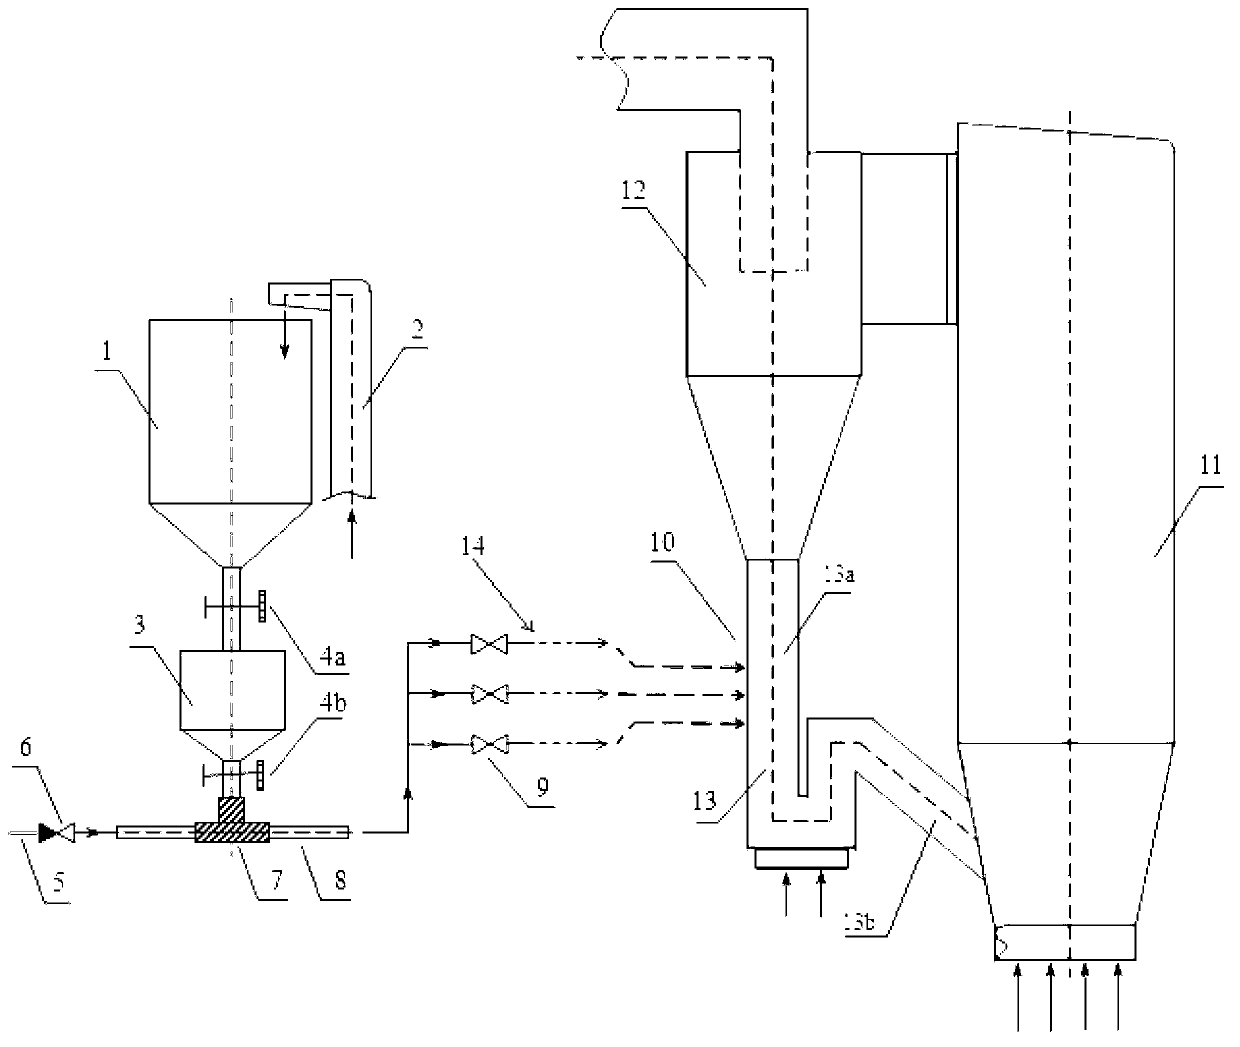 Desulfurization system of circulating fluidized bed boiler